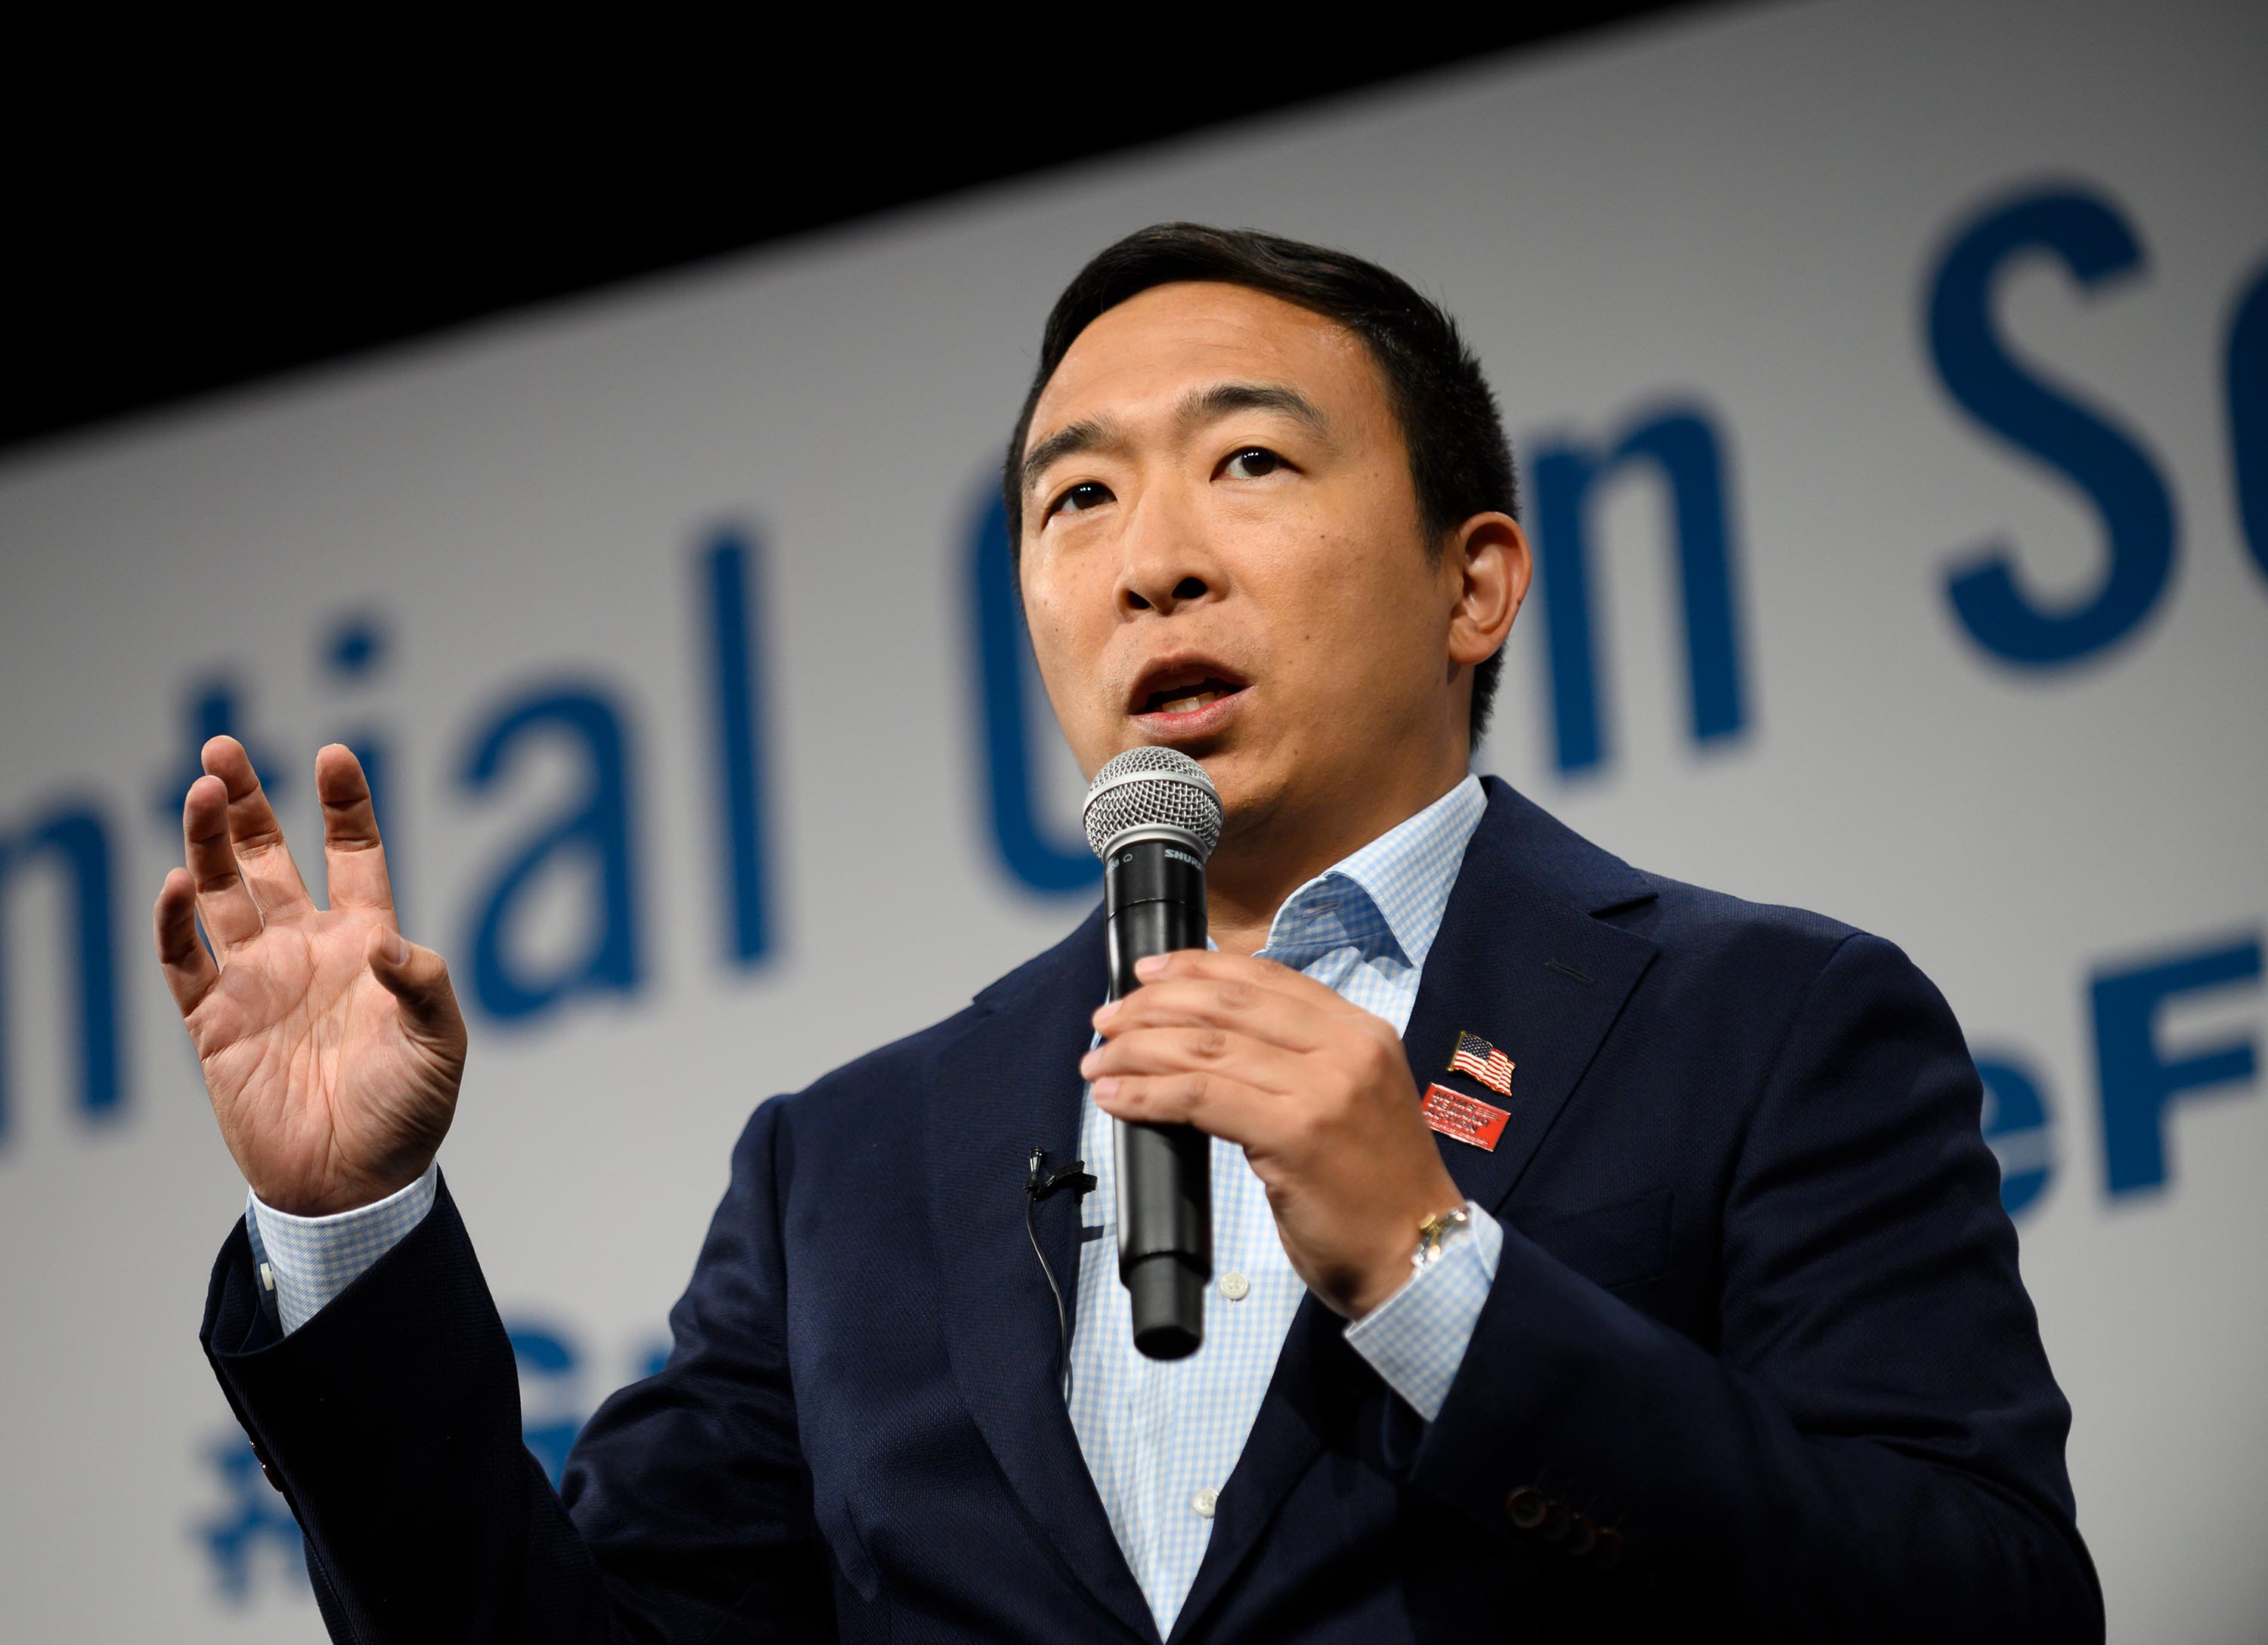 17-facts-about-andrew-yang